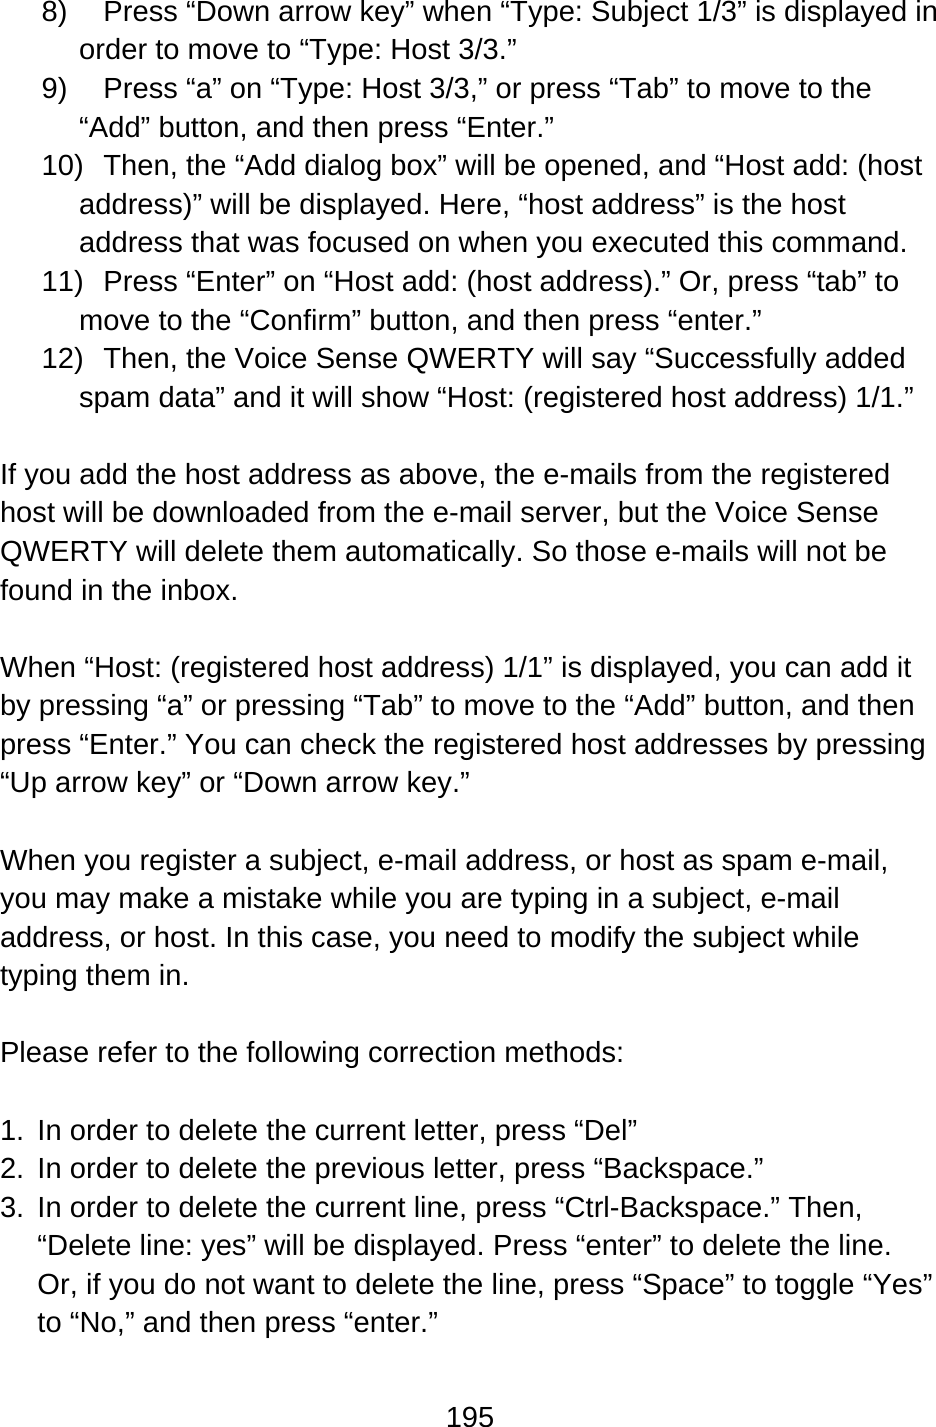 195  8)  Press “Down arrow key” when “Type: Subject 1/3” is displayed in order to move to “Type: Host 3/3.” 9)  Press “a” on “Type: Host 3/3,” or press “Tab” to move to the “Add” button, and then press “Enter.” 10)  Then, the “Add dialog box” will be opened, and “Host add: (host address)” will be displayed. Here, “host address” is the host address that was focused on when you executed this command. 11)  Press “Enter” on “Host add: (host address).” Or, press “tab” to move to the “Confirm” button, and then press “enter.” 12)  Then, the Voice Sense QWERTY will say “Successfully added spam data” and it will show “Host: (registered host address) 1/1.”  If you add the host address as above, the e-mails from the registered host will be downloaded from the e-mail server, but the Voice Sense QWERTY will delete them automatically. So those e-mails will not be found in the inbox.  When “Host: (registered host address) 1/1” is displayed, you can add it by pressing “a” or pressing “Tab” to move to the “Add” button, and then press “Enter.” You can check the registered host addresses by pressing “Up arrow key” or “Down arrow key.”  When you register a subject, e-mail address, or host as spam e-mail, you may make a mistake while you are typing in a subject, e-mail address, or host. In this case, you need to modify the subject while typing them in.  Please refer to the following correction methods:  1.  In order to delete the current letter, press “Del” 2.  In order to delete the previous letter, press “Backspace.” 3.  In order to delete the current line, press “Ctrl-Backspace.” Then, “Delete line: yes” will be displayed. Press “enter” to delete the line.   Or, if you do not want to delete the line, press “Space” to toggle “Yes” to “No,” and then press “enter.”  